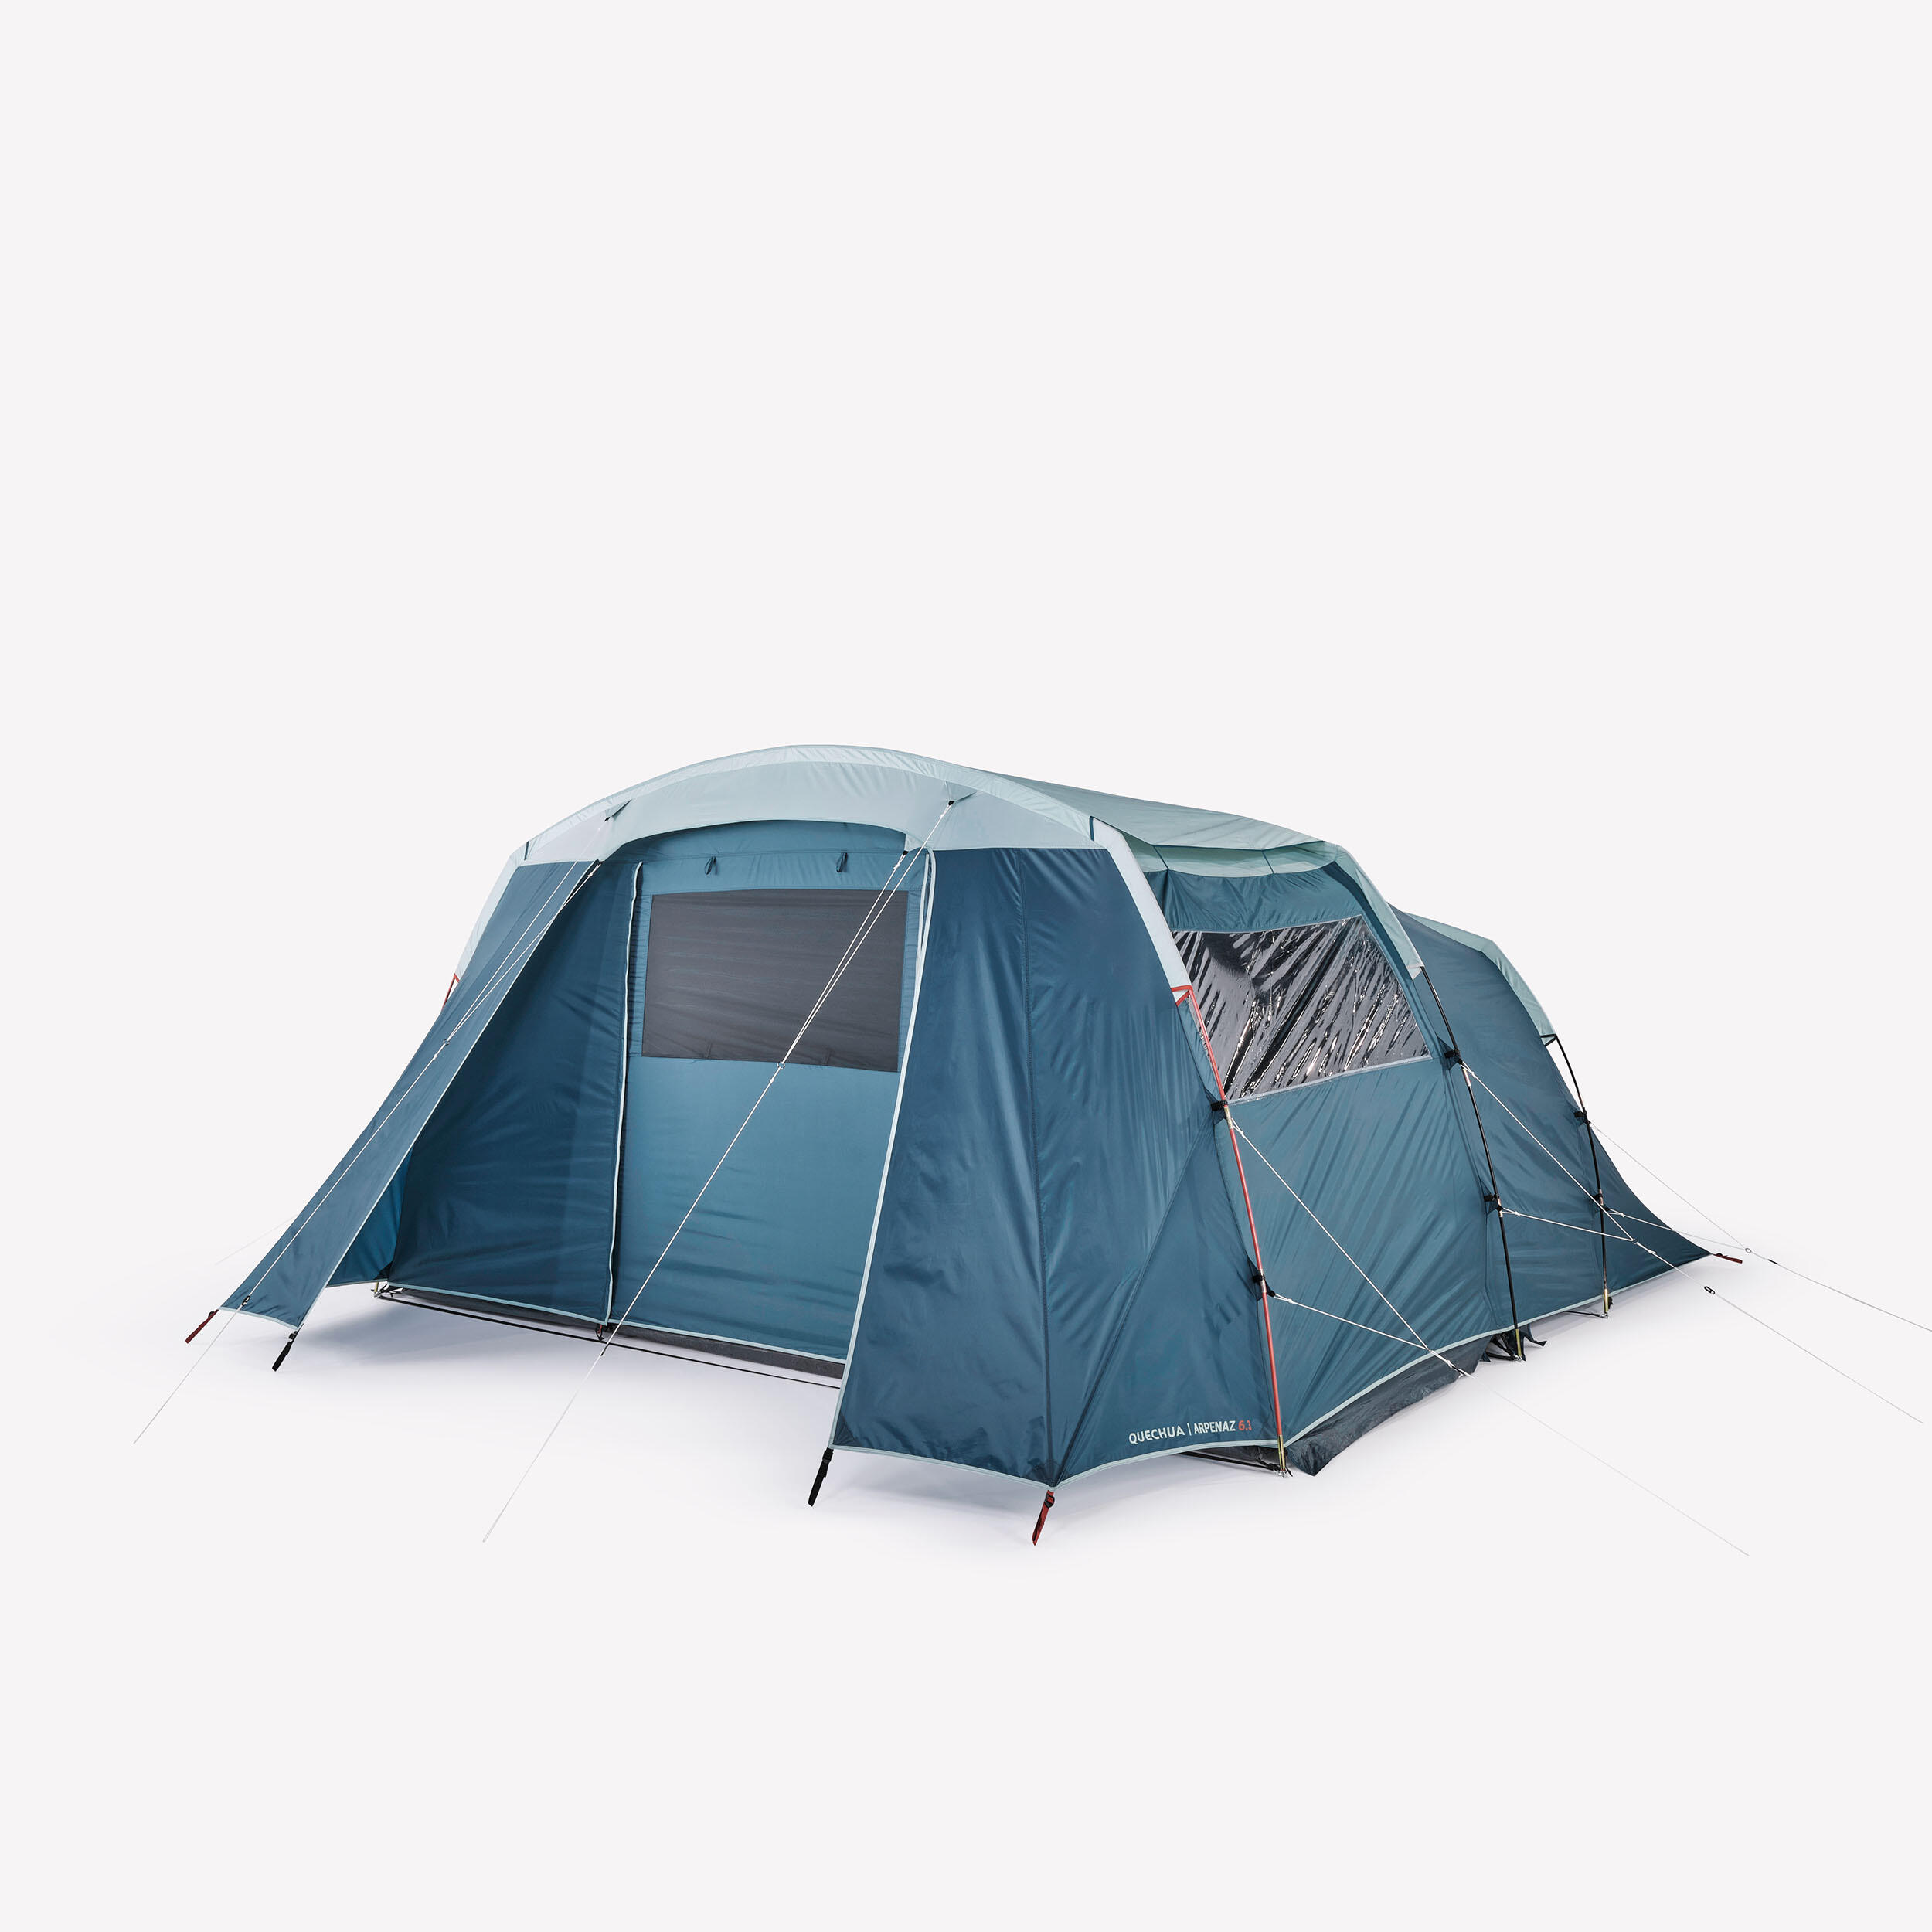 Camping hoop tent - Arpenaz 6.3 - 6-Person - 3 Rooms 6/14